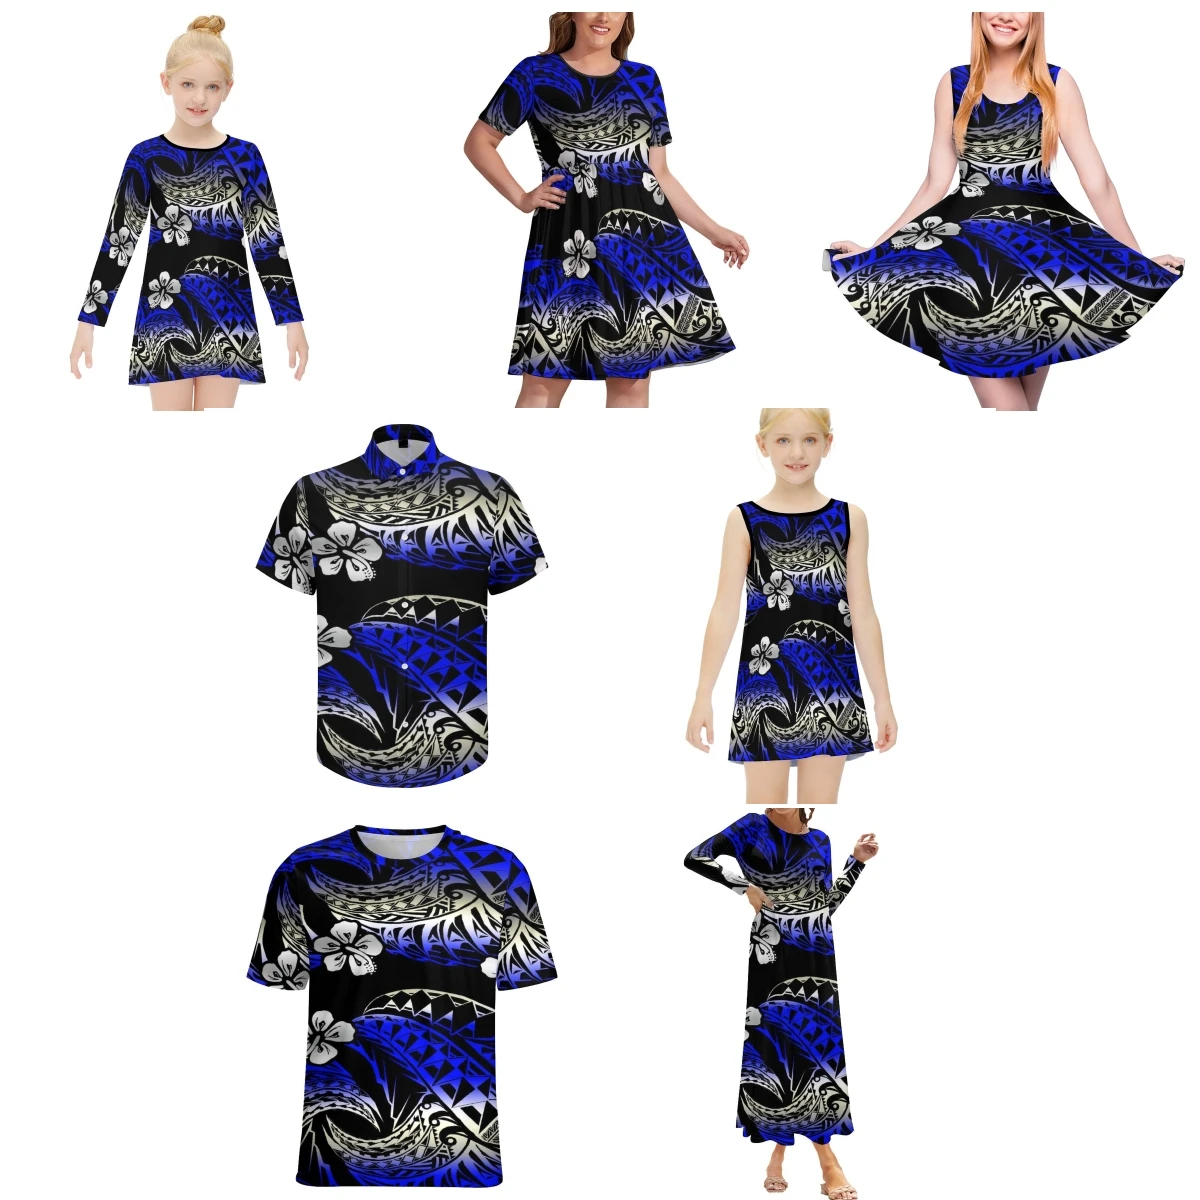 

Plus Size Samoan Design Family Set Chic Tribal Clothes Islanders Top Quality Dress for Women Free Shipping